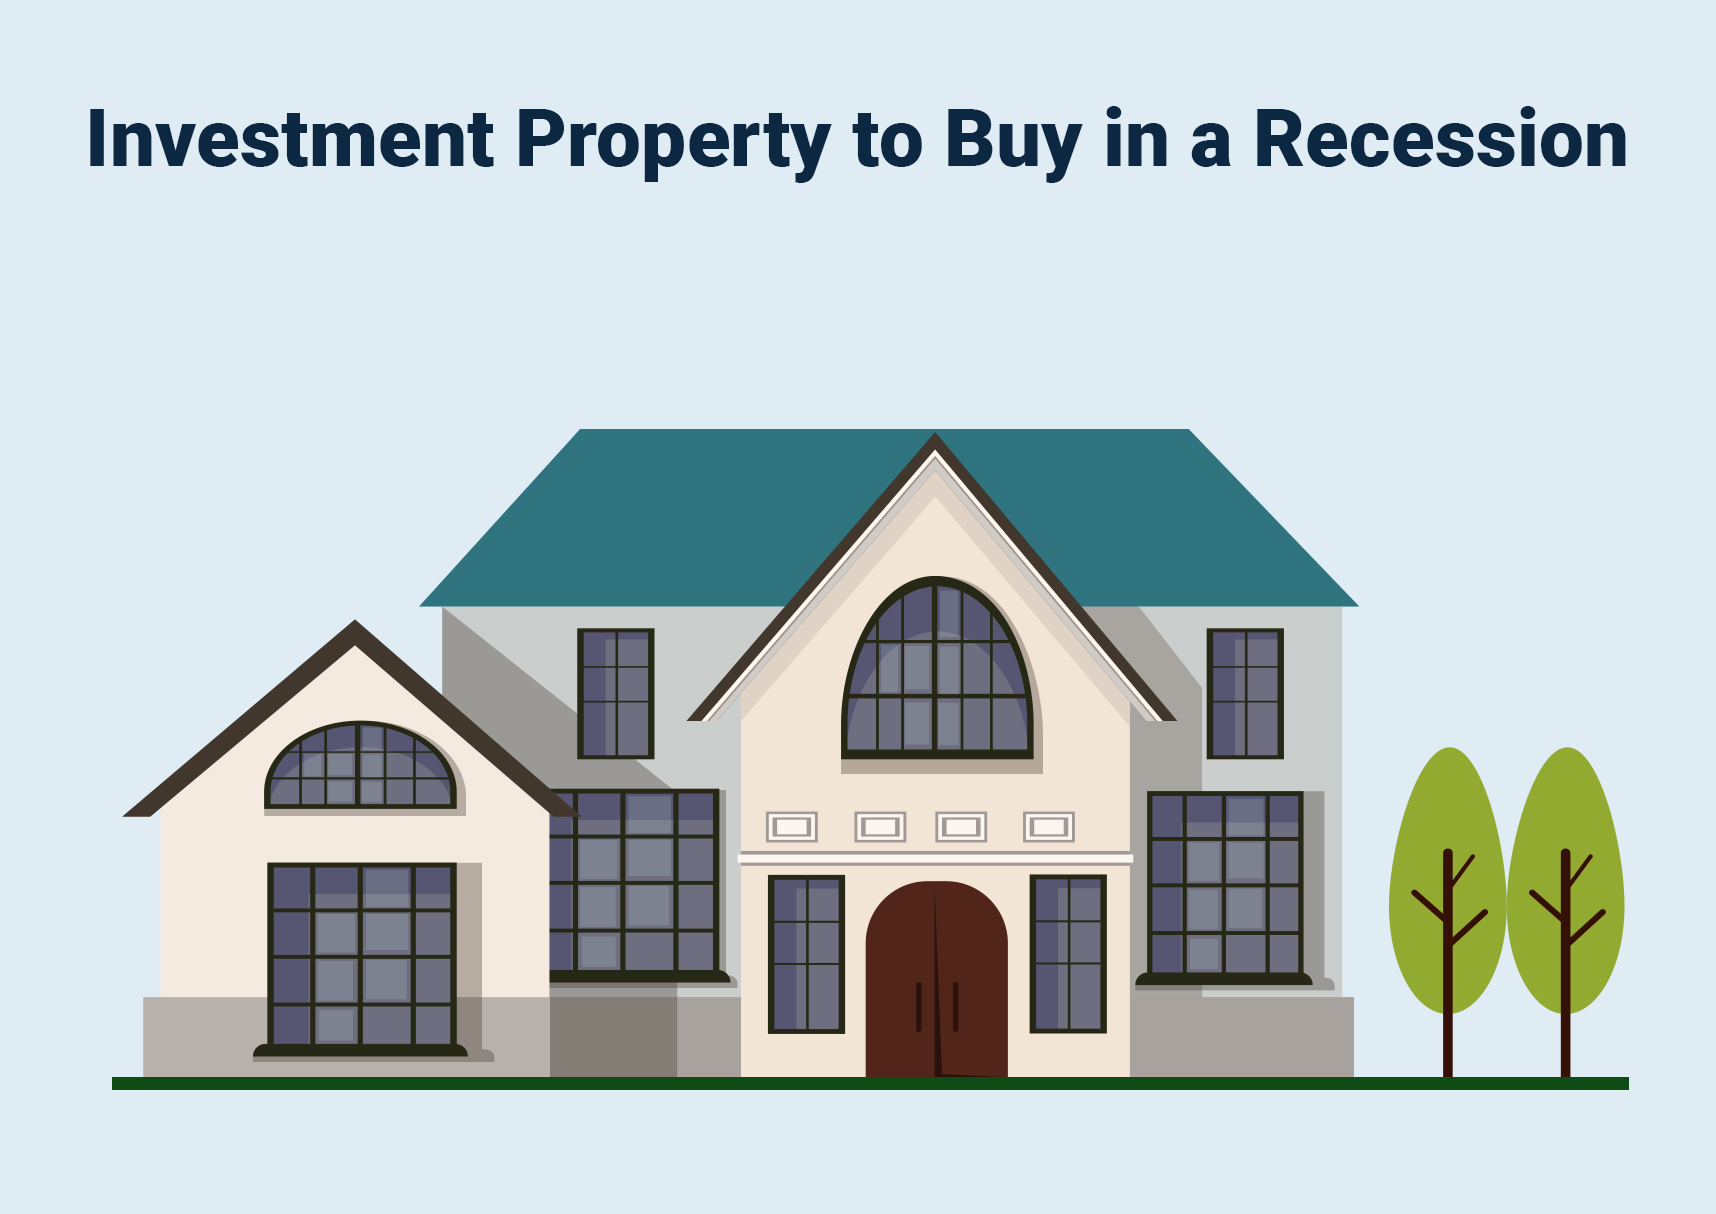 Investment Property to Buy in a Recession